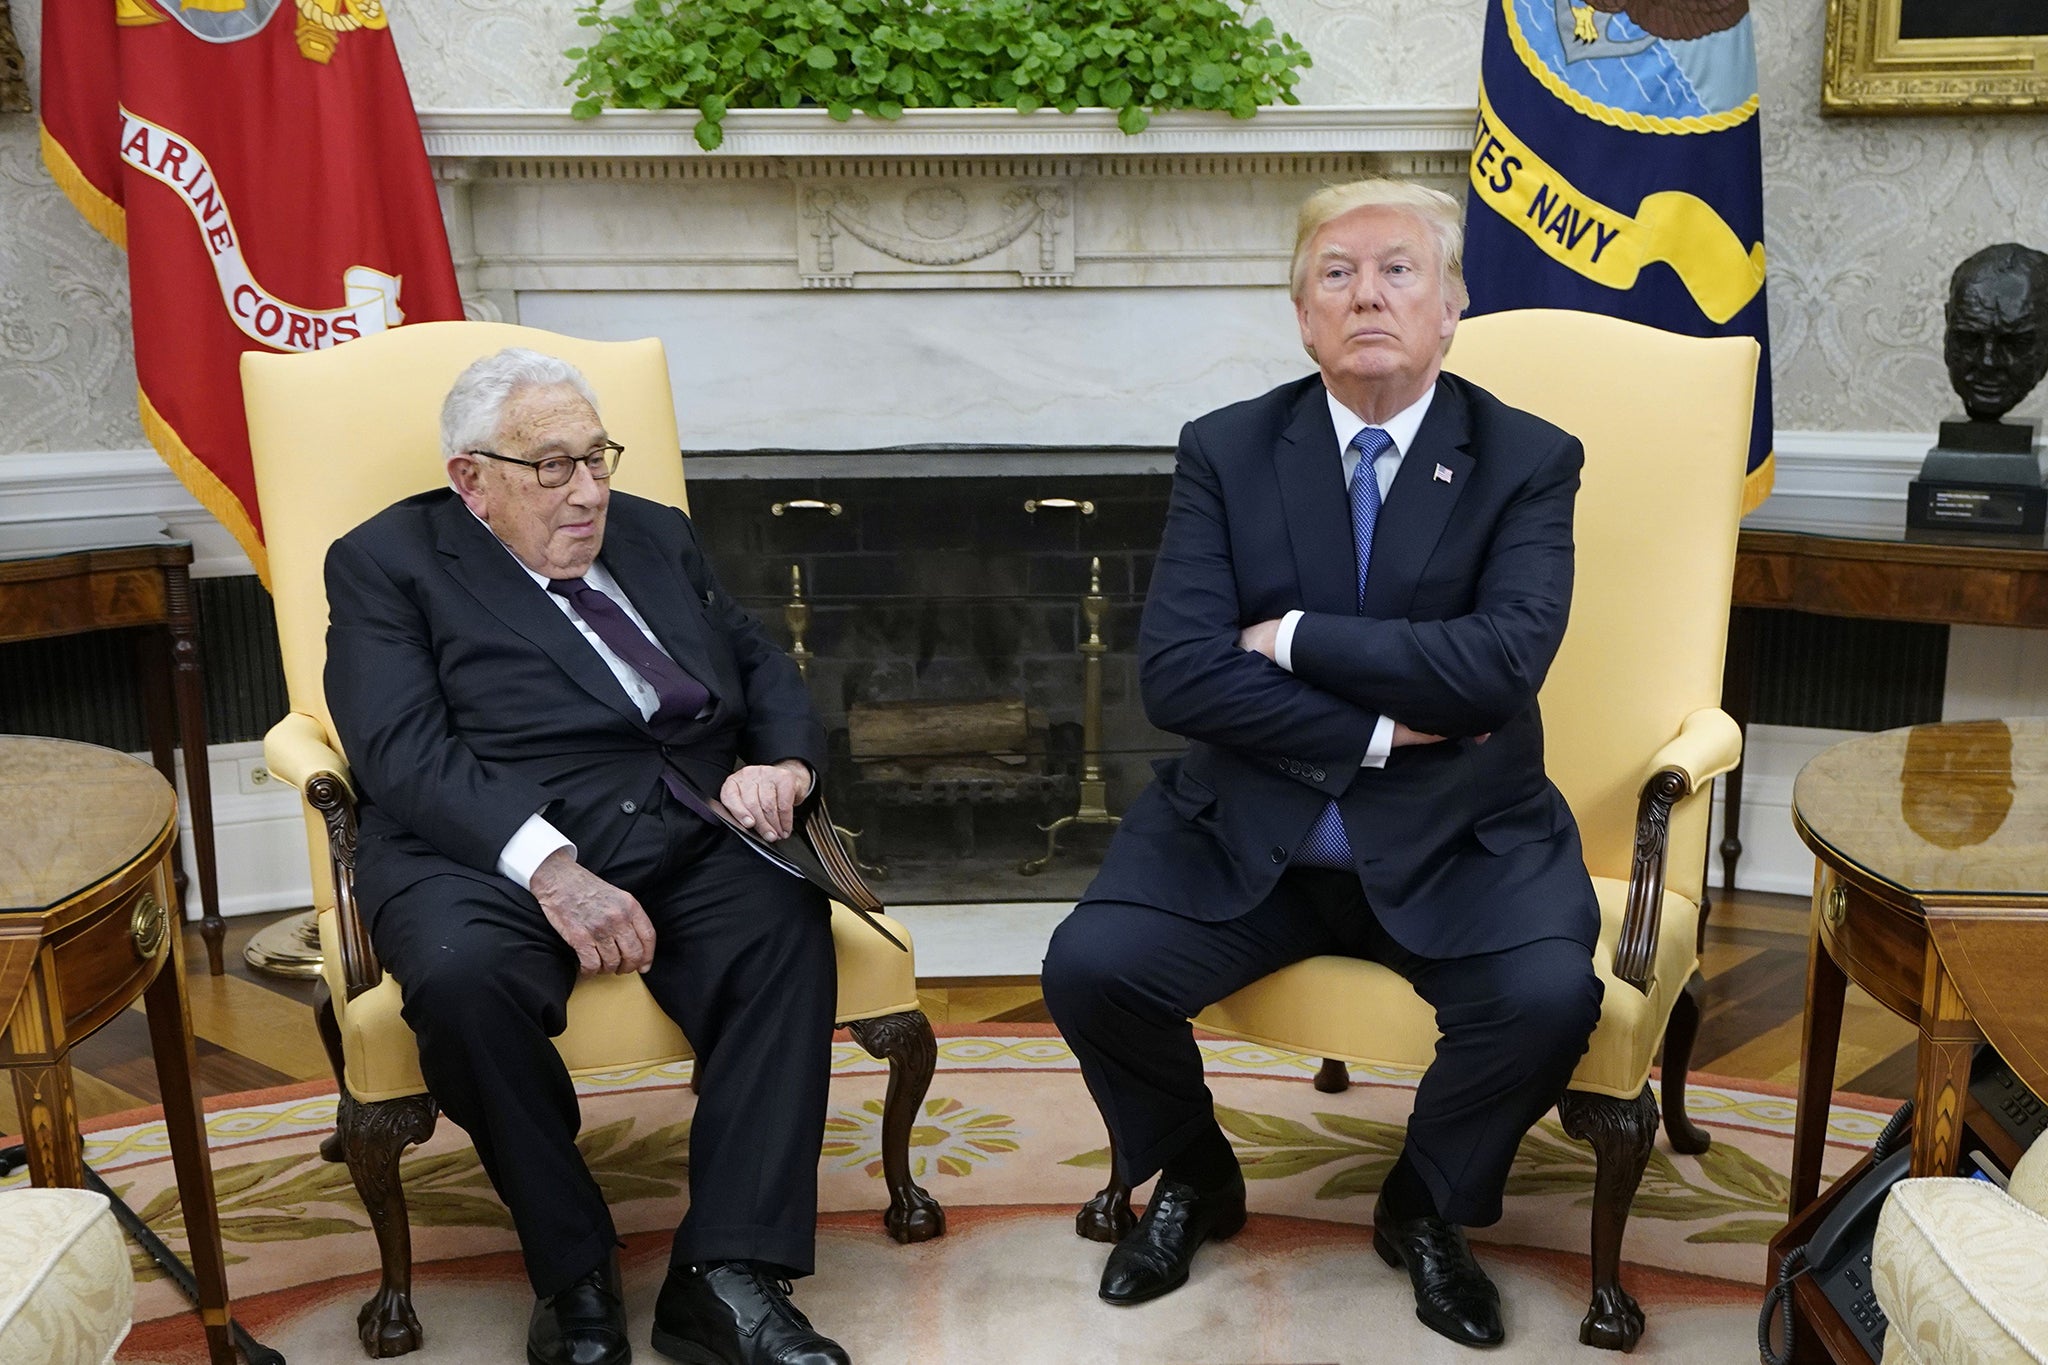 US President Donald Trump (R) meets with former US Secretary of State Henry Kissinger in the Oval Office of the White House on 10 October 2017 in Washington, DC.